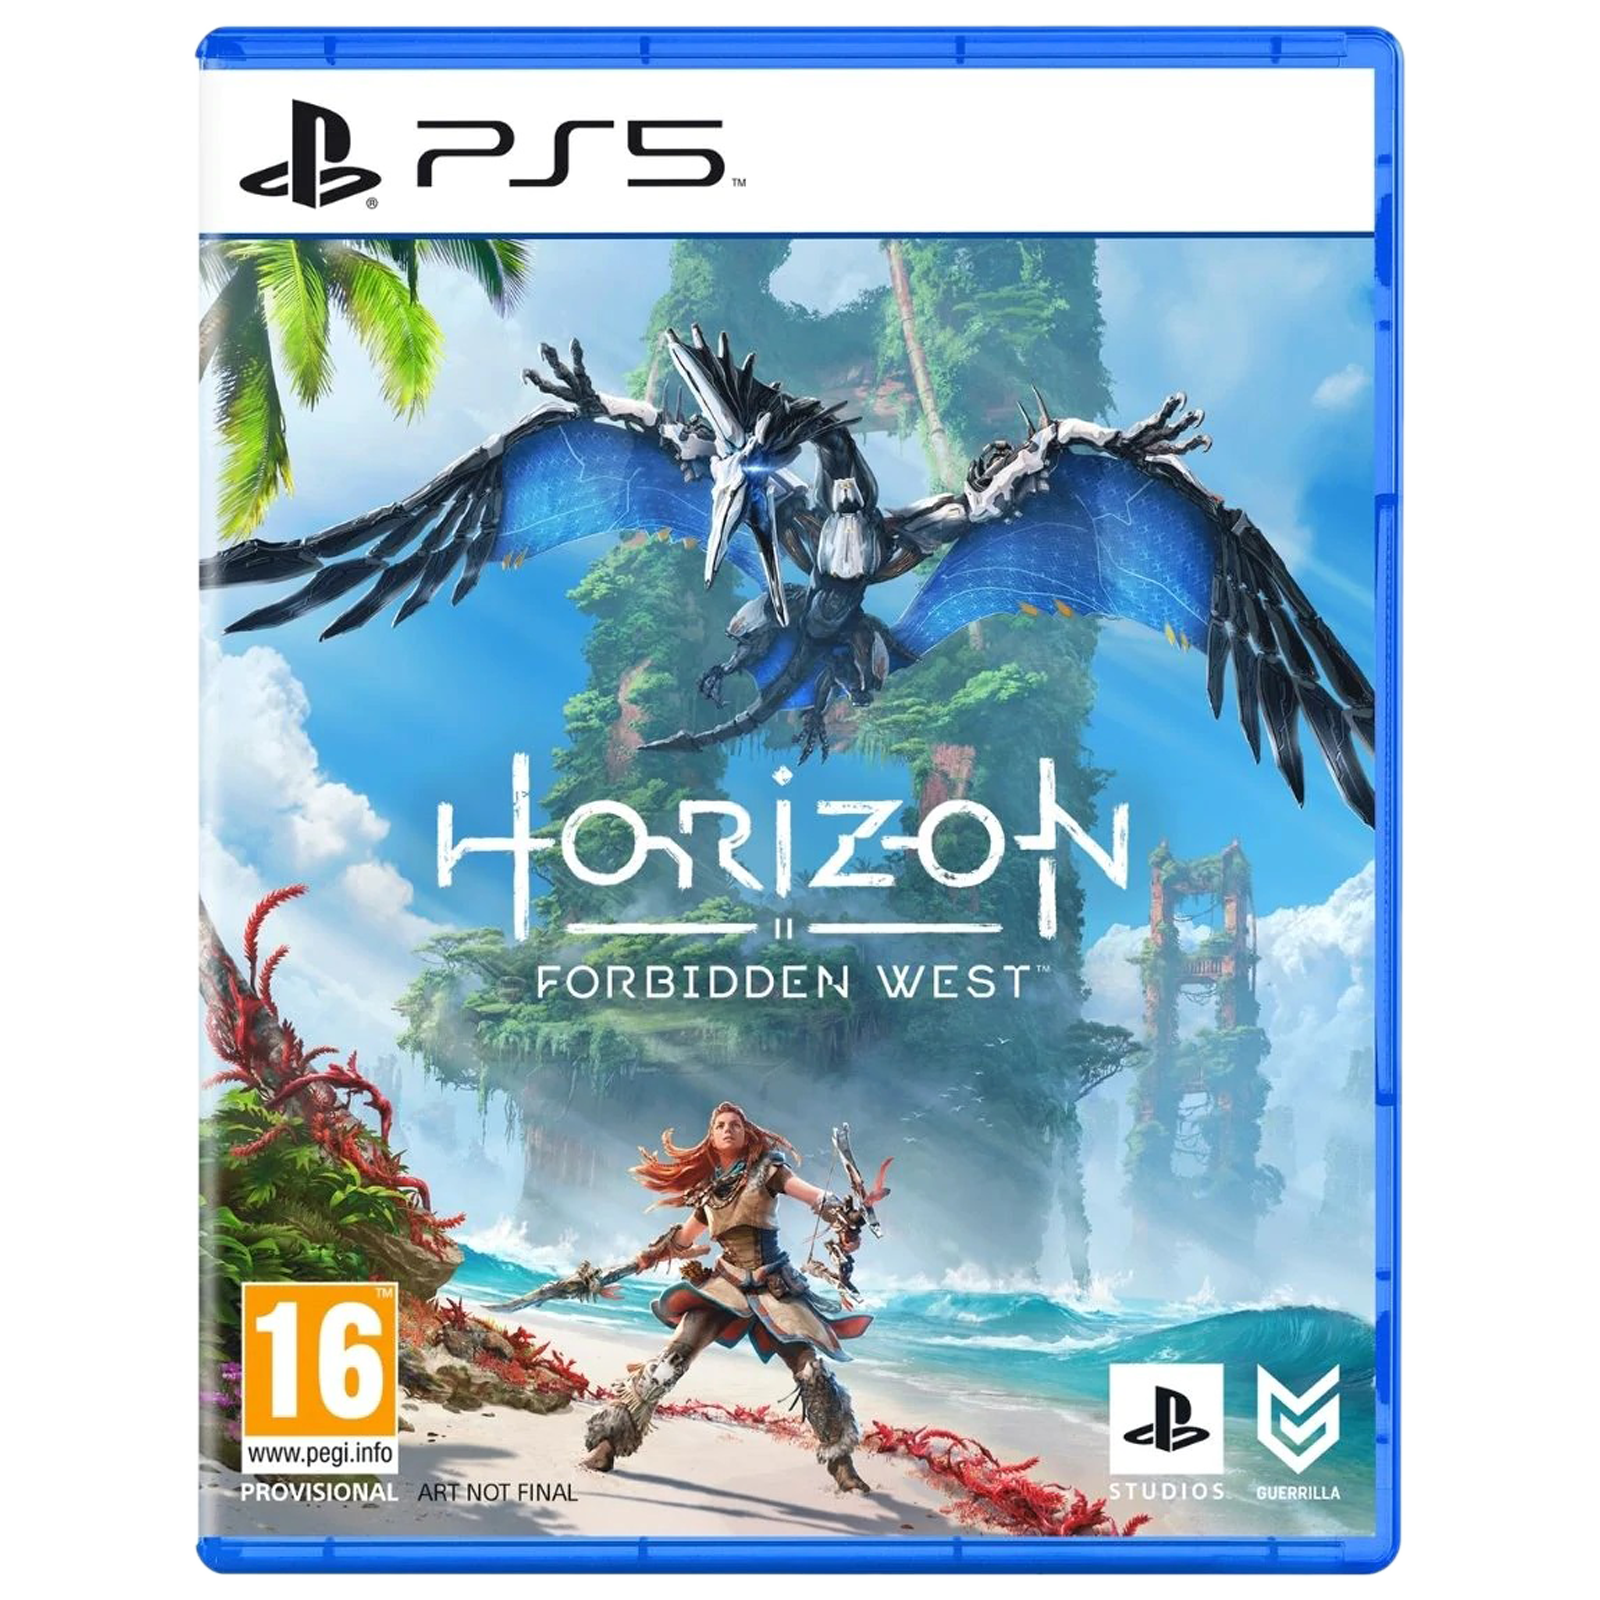 Horizon Forbidden West Complete Edition arrives Oct 6 on PS5 — bringing the  characters to life – PlayStation.Blog